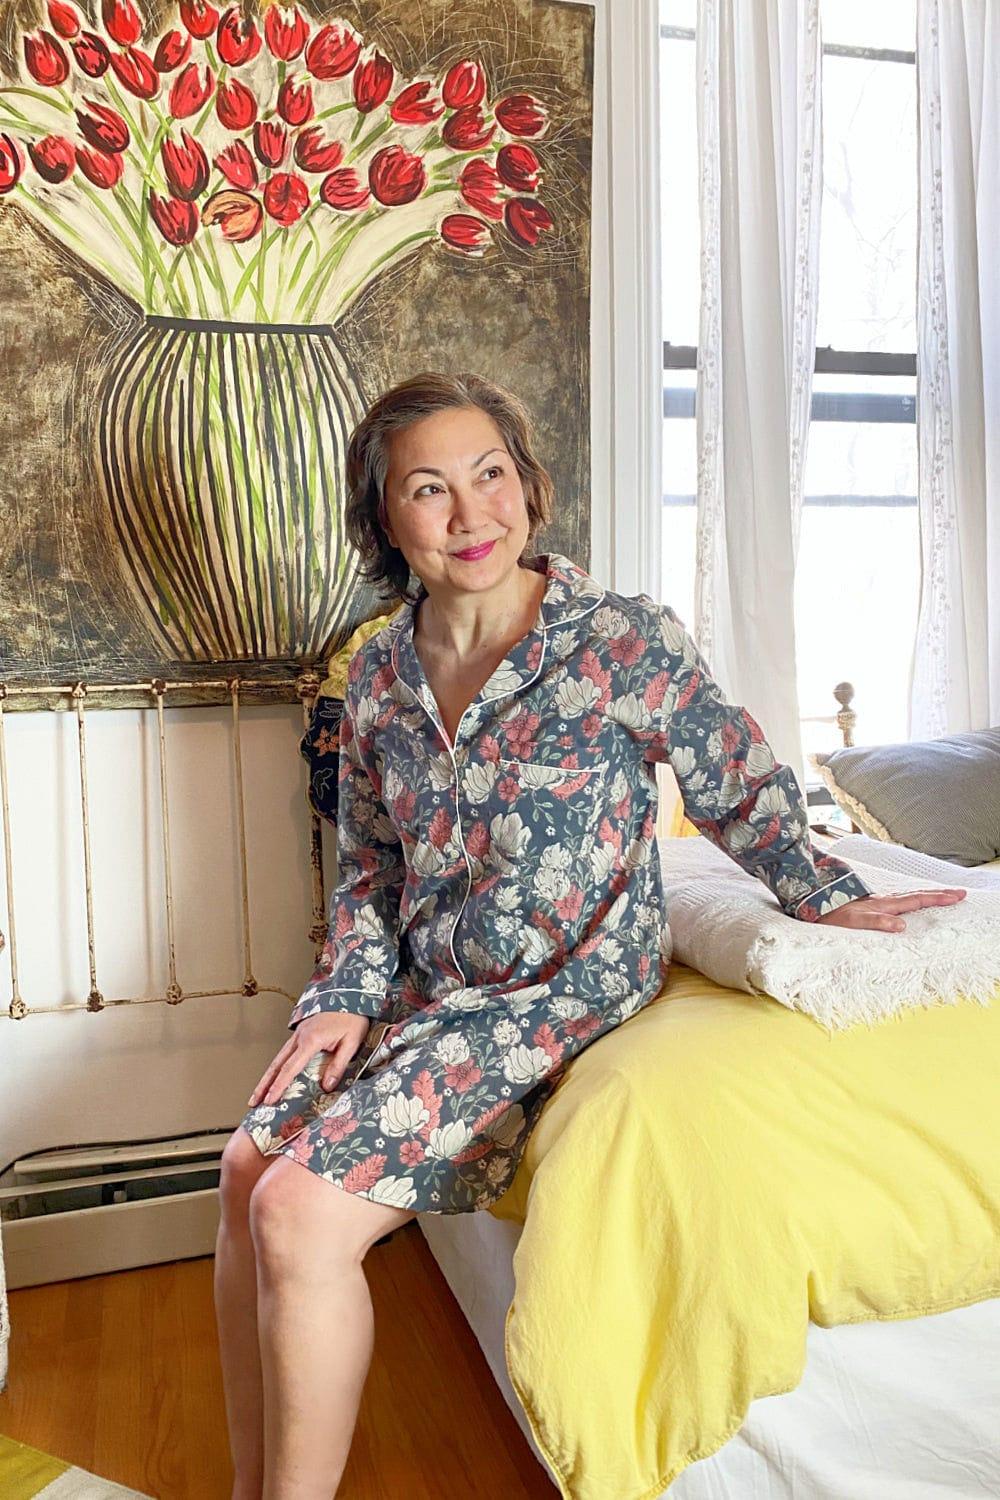 Woman sitting on the edge of a bed wearing a floral pink, grey and white night shirt. There is a floral painting behind her on the wall.